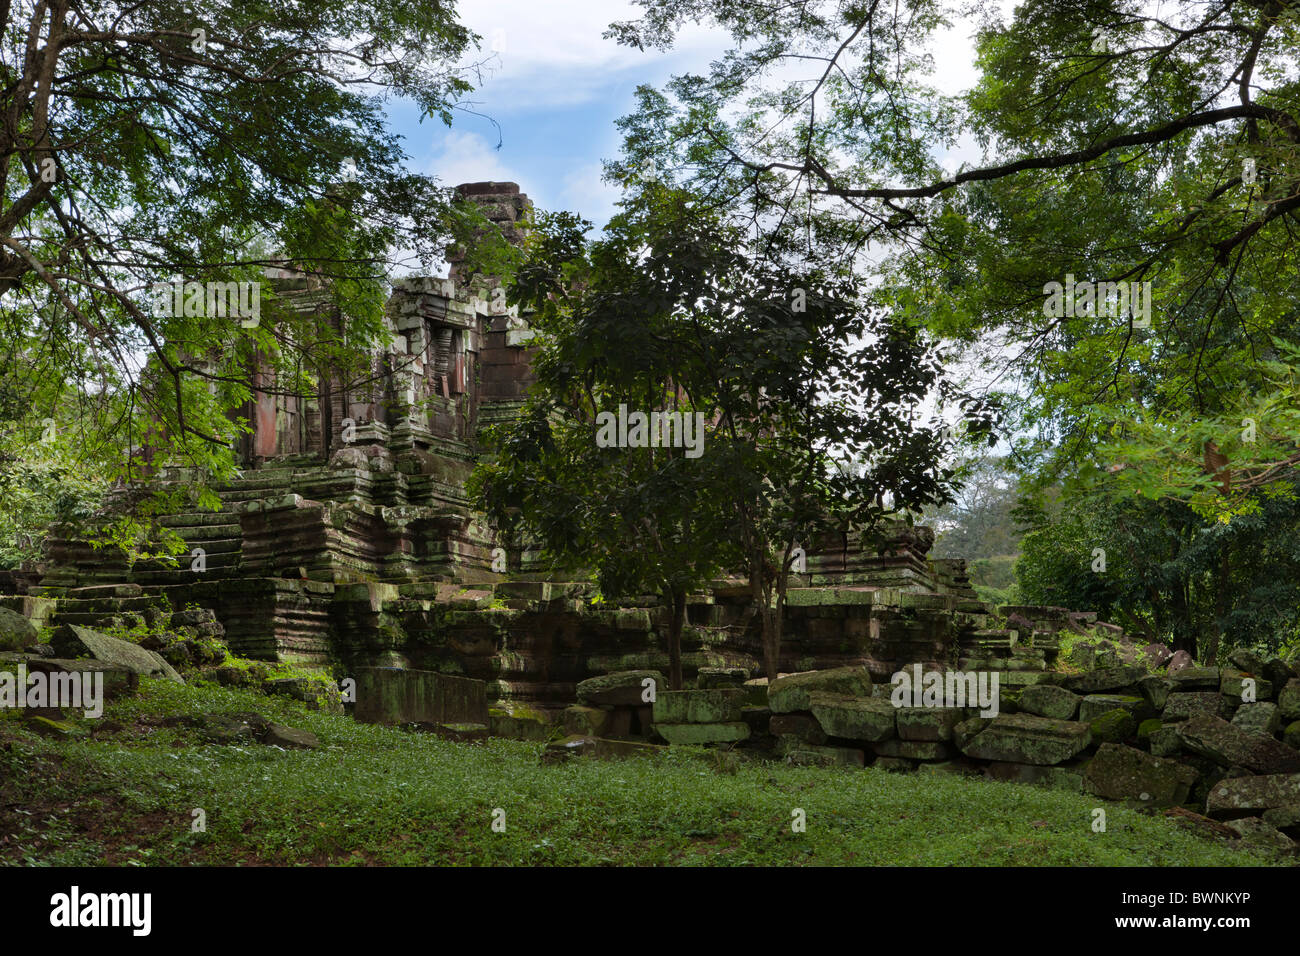 Preah Pithu V. Ruins at archaeological site. Angkor Thom, UNESCO World Heritage Site, Cambodia, Indochina, Asia Stock Photo